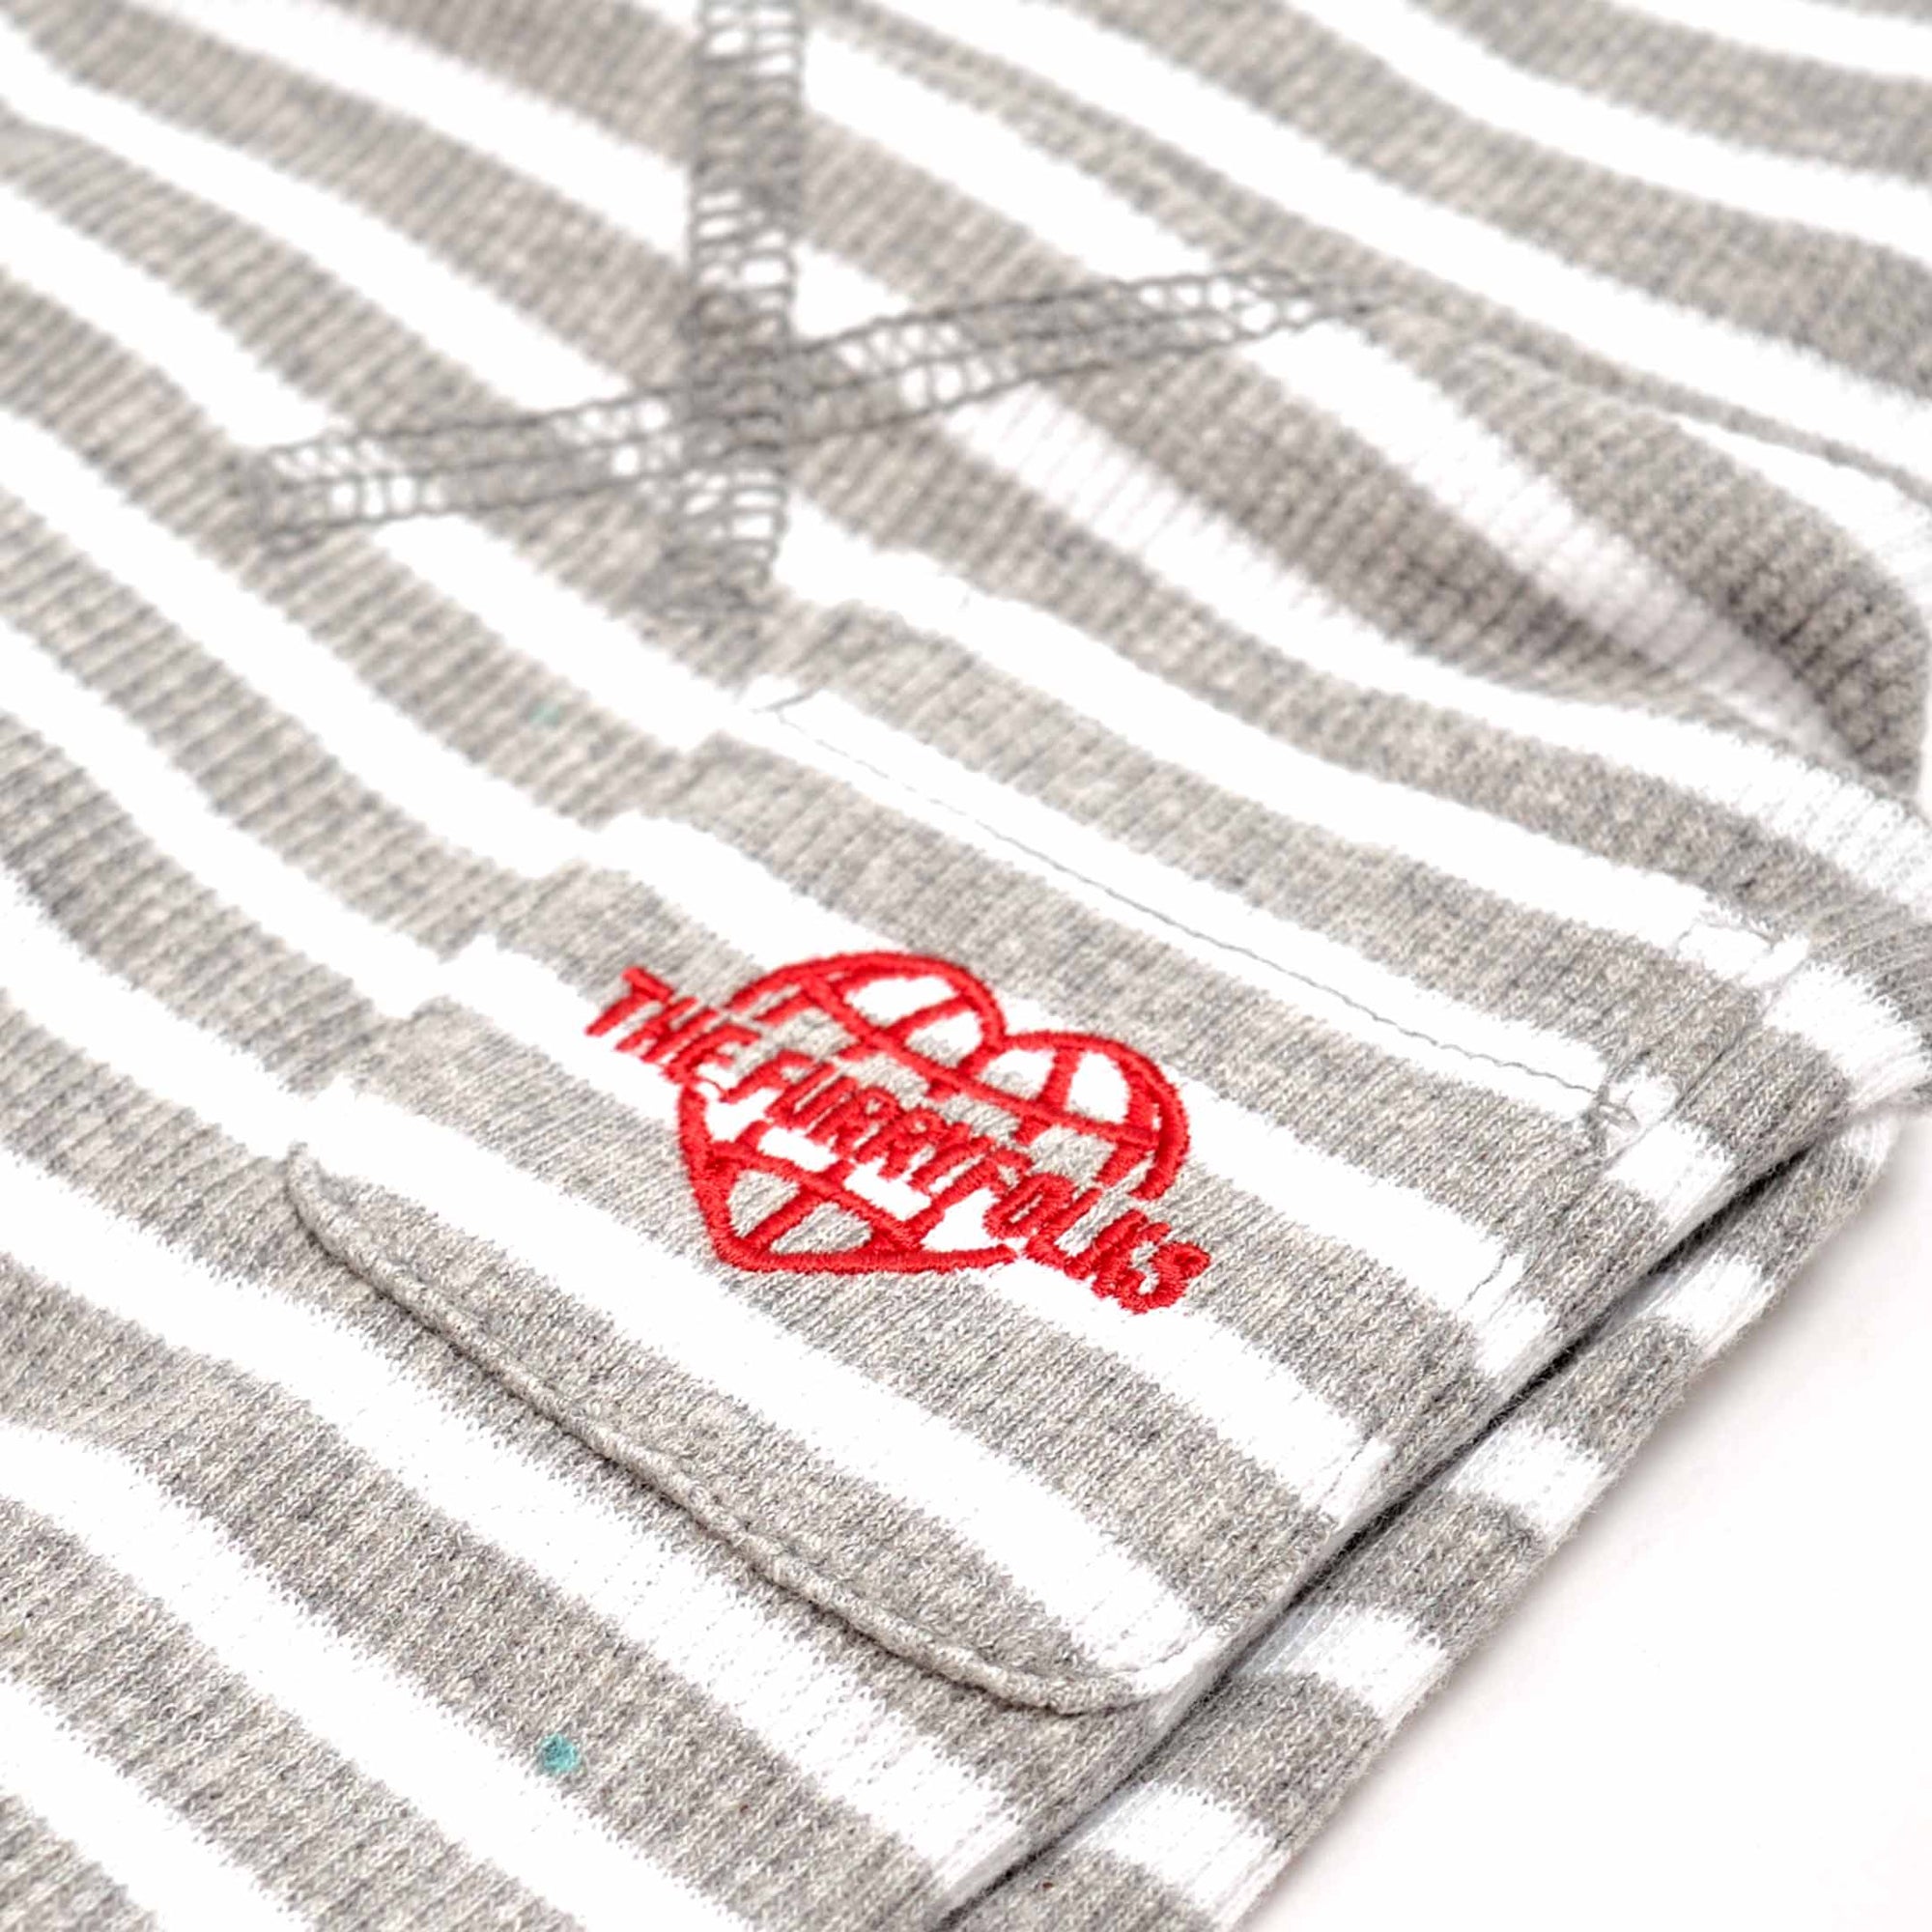 Detail of a Heather Gray & Ivory  striped dog shirt featuring 'THE FURRYFOLKS' logo, embodying pet-friendly fashion.